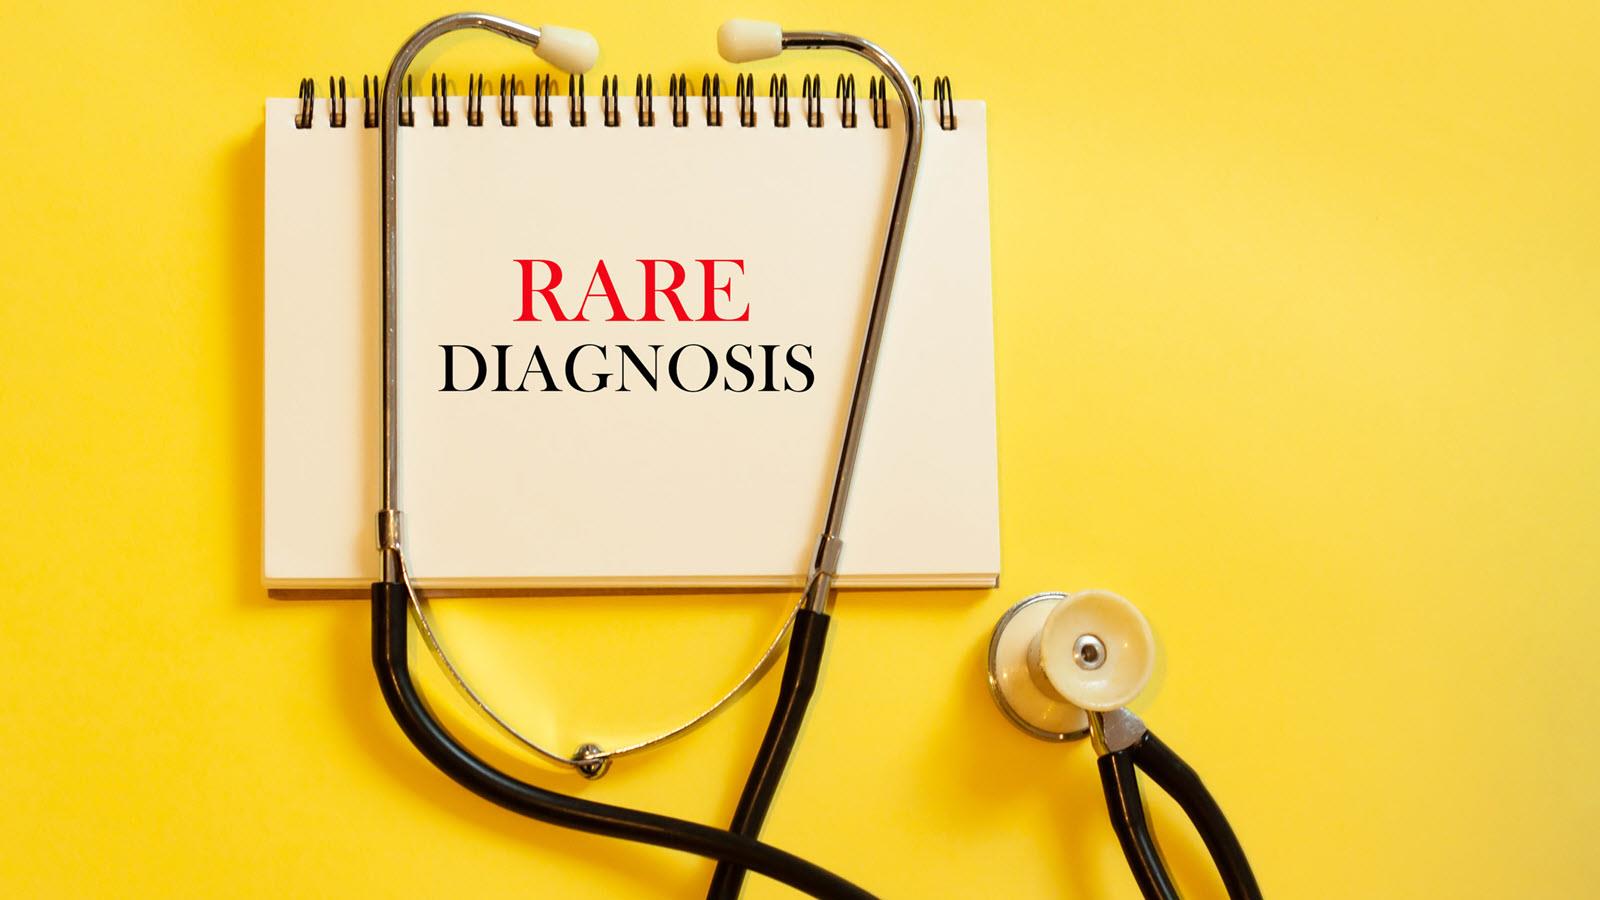 notepad that says rare diagnosis alongside a stethoscope